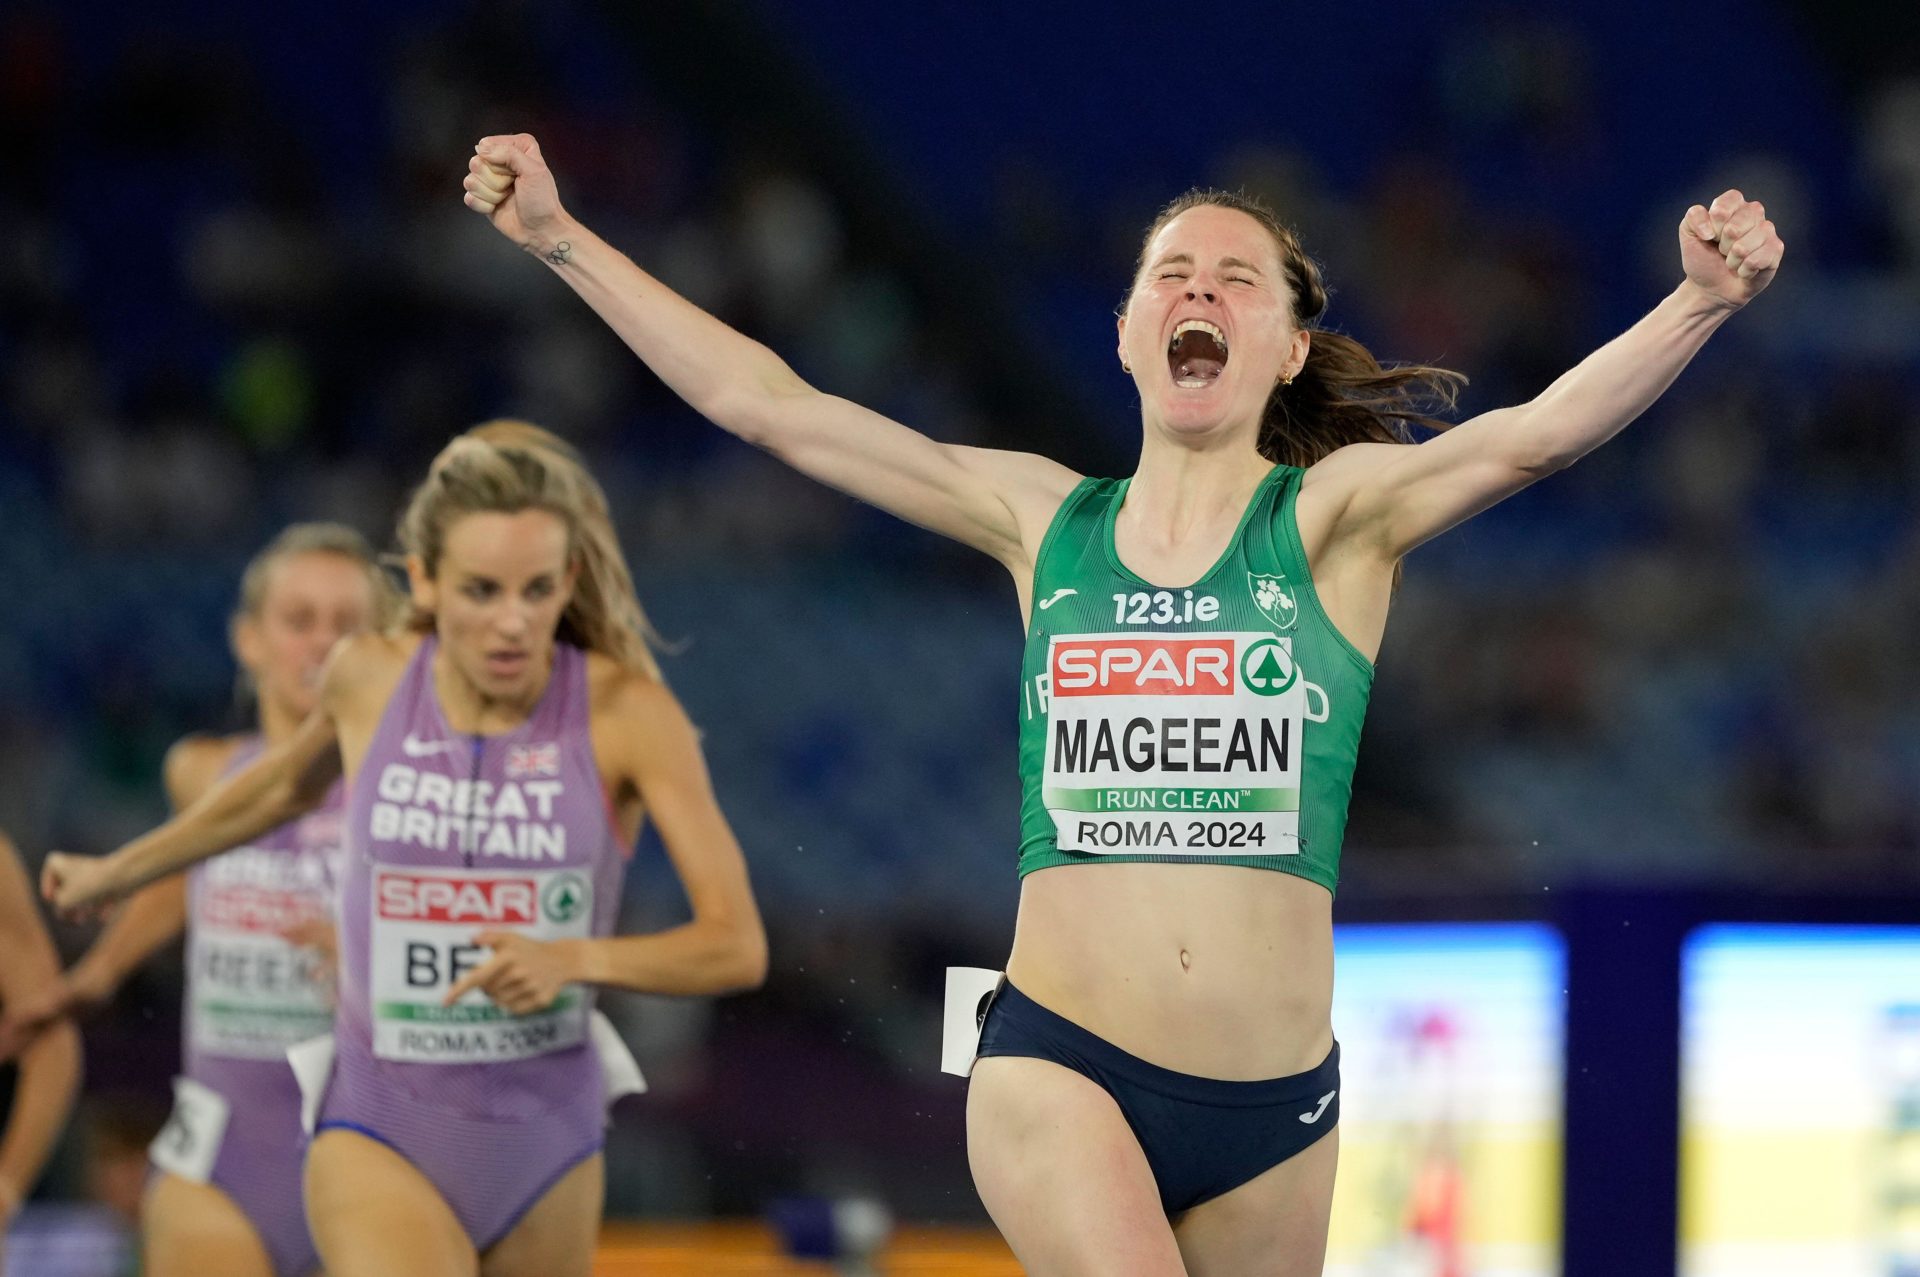 Ciara Mageean, of Ireland celebrates after winning the gold medal in the women's 1500 meters final at the European Athletics Championships in Rome, Sunday, June 9, 2024. Image: AP Photo/Alessandra Tarantino